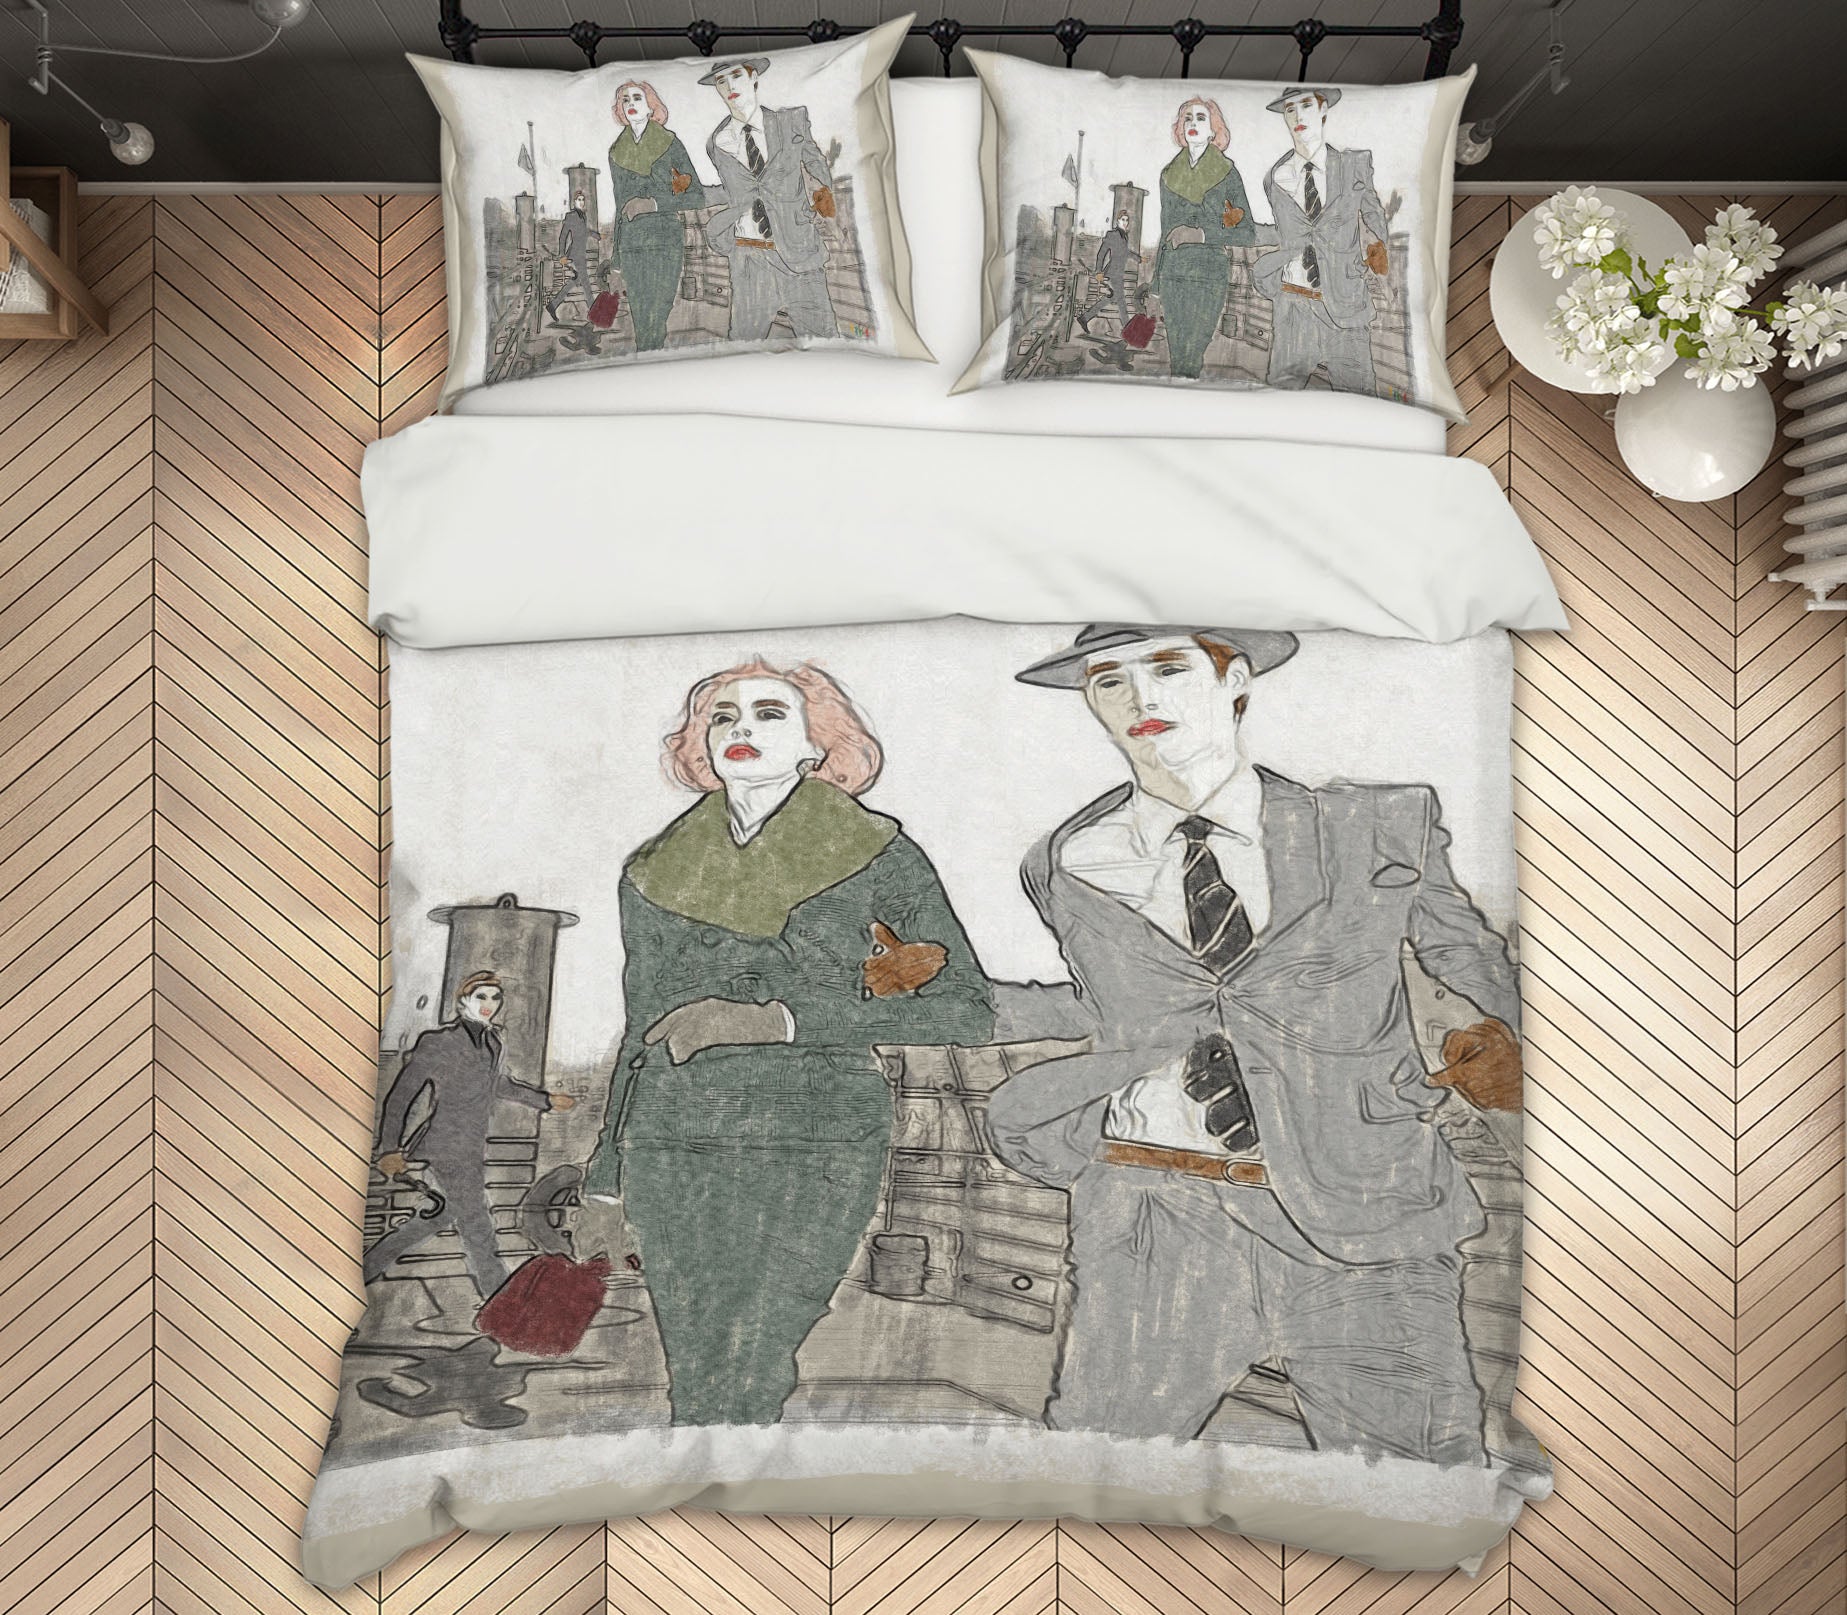 3D Couple Dating 2007 Marco Cavazzana Bedding Bed Pillowcases Quilt